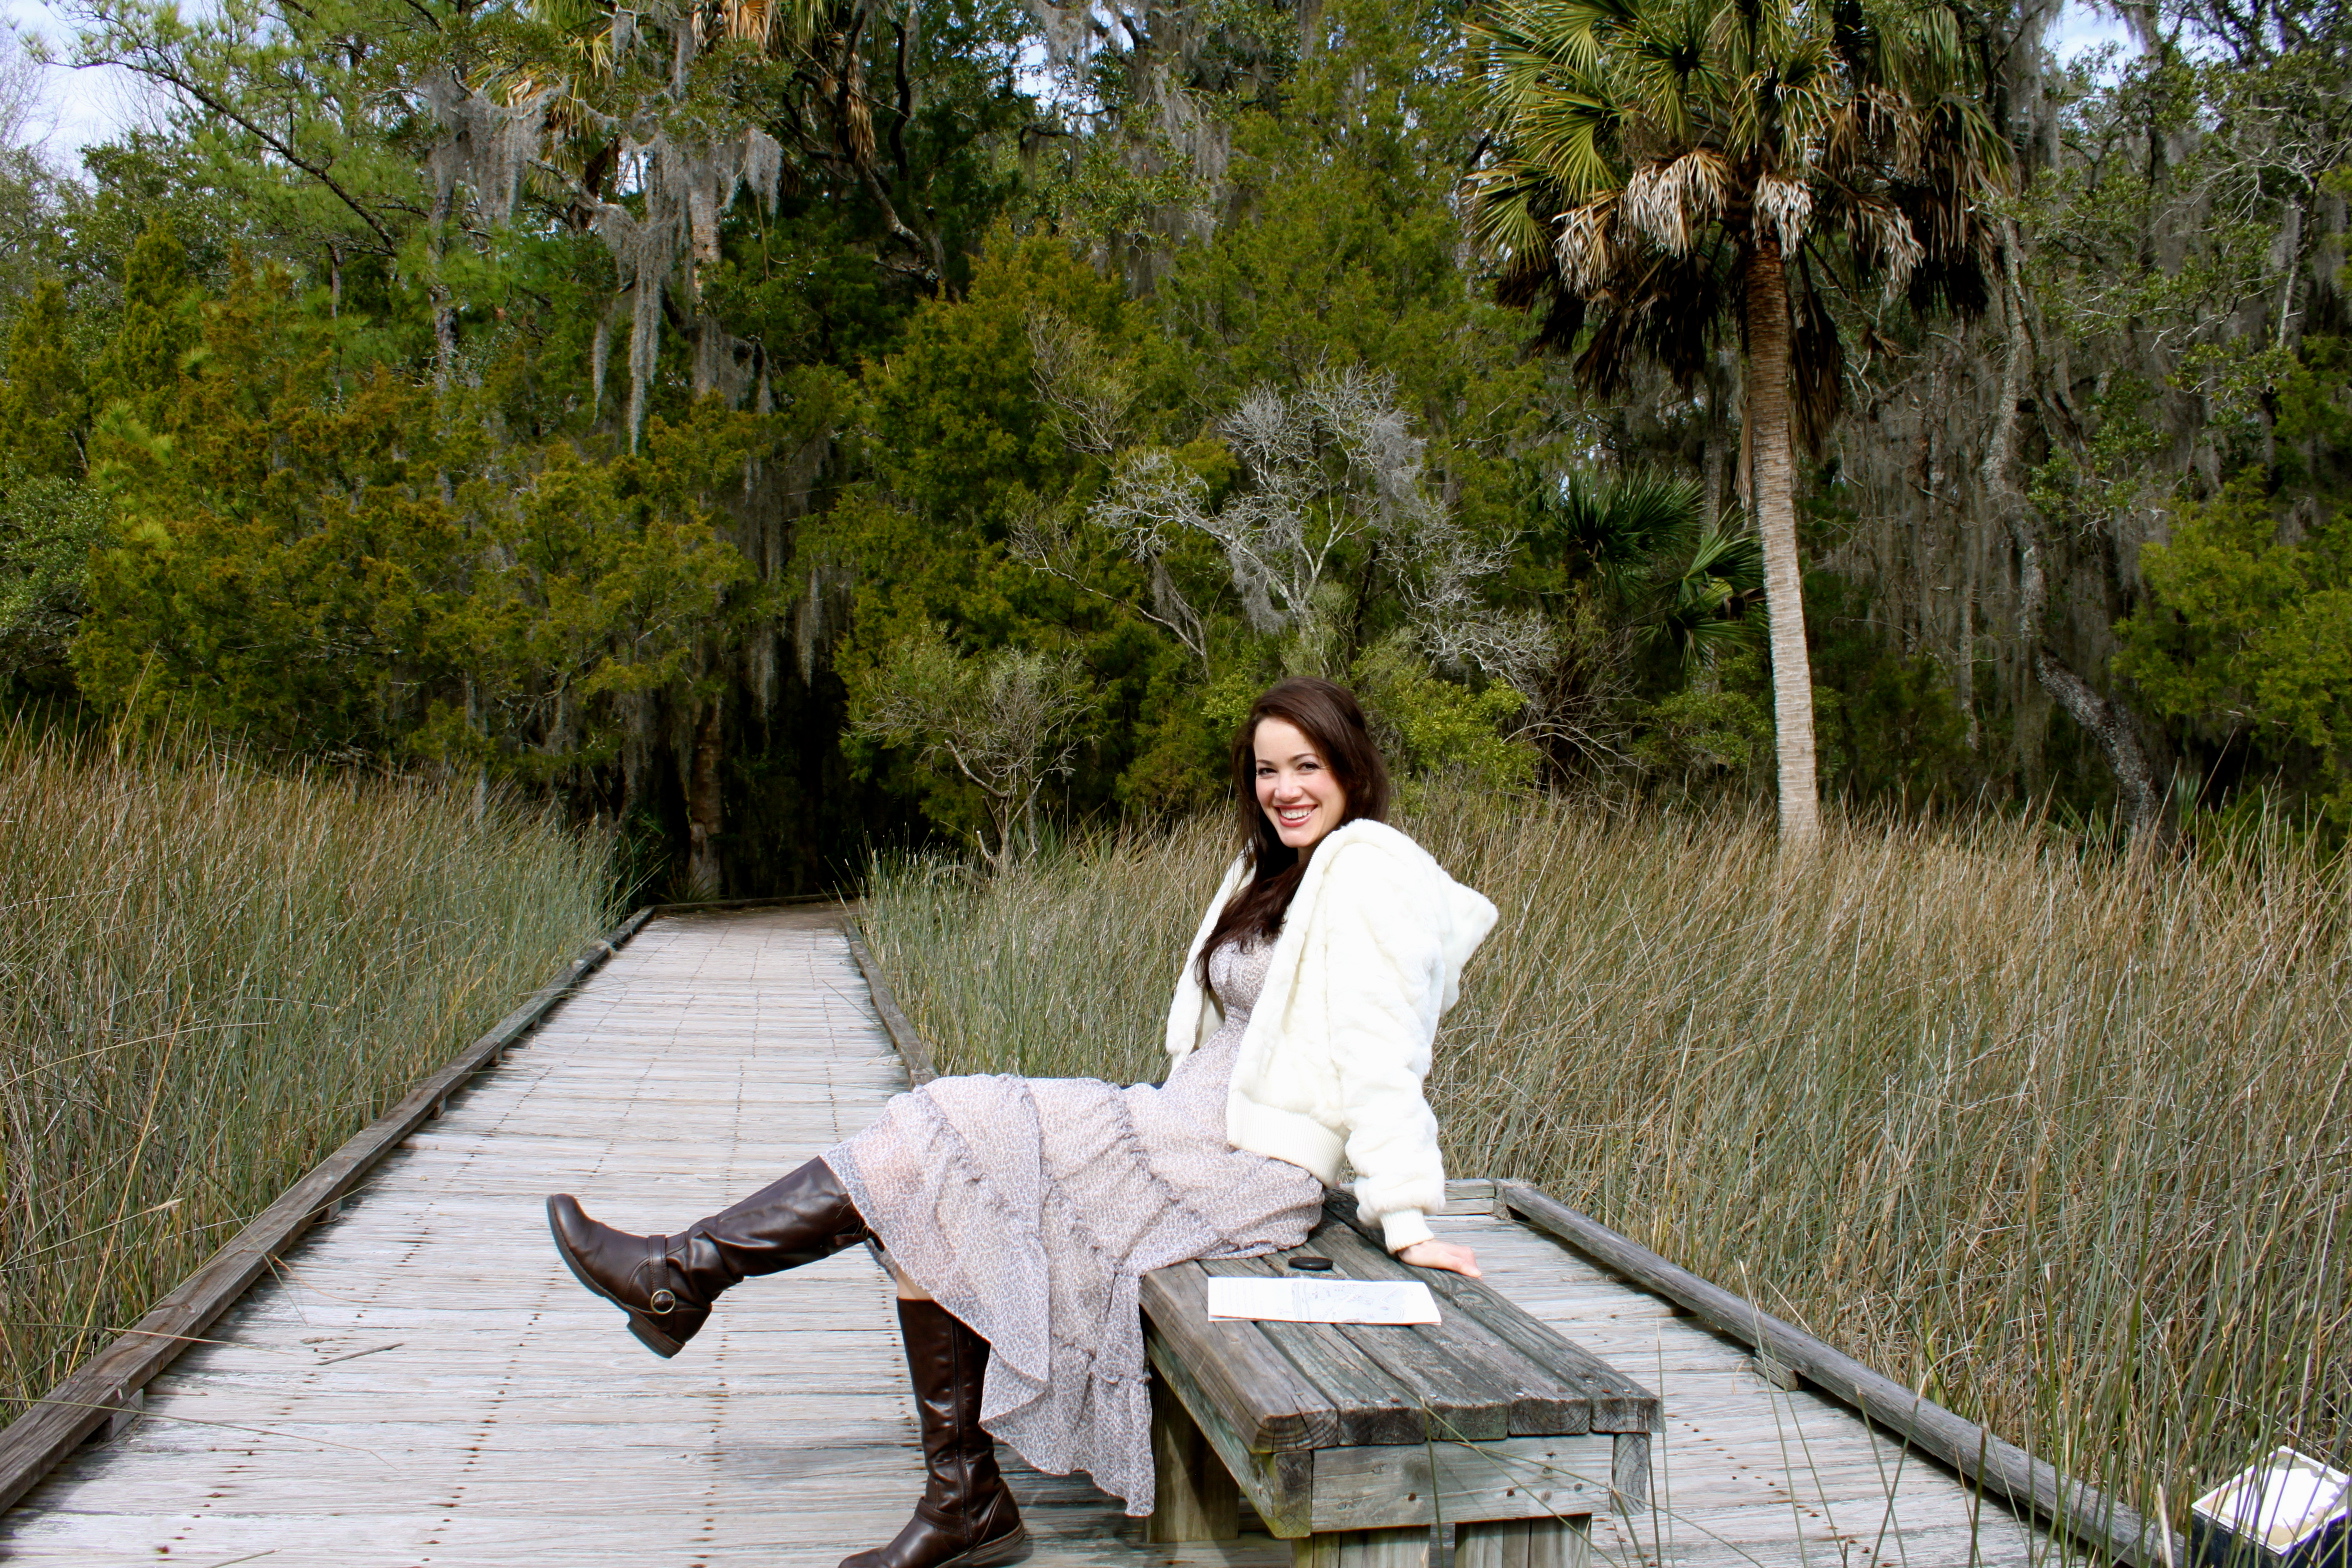 The swampy boardwalk had little benches for sitting, lazing, or kicking up your boot heels.